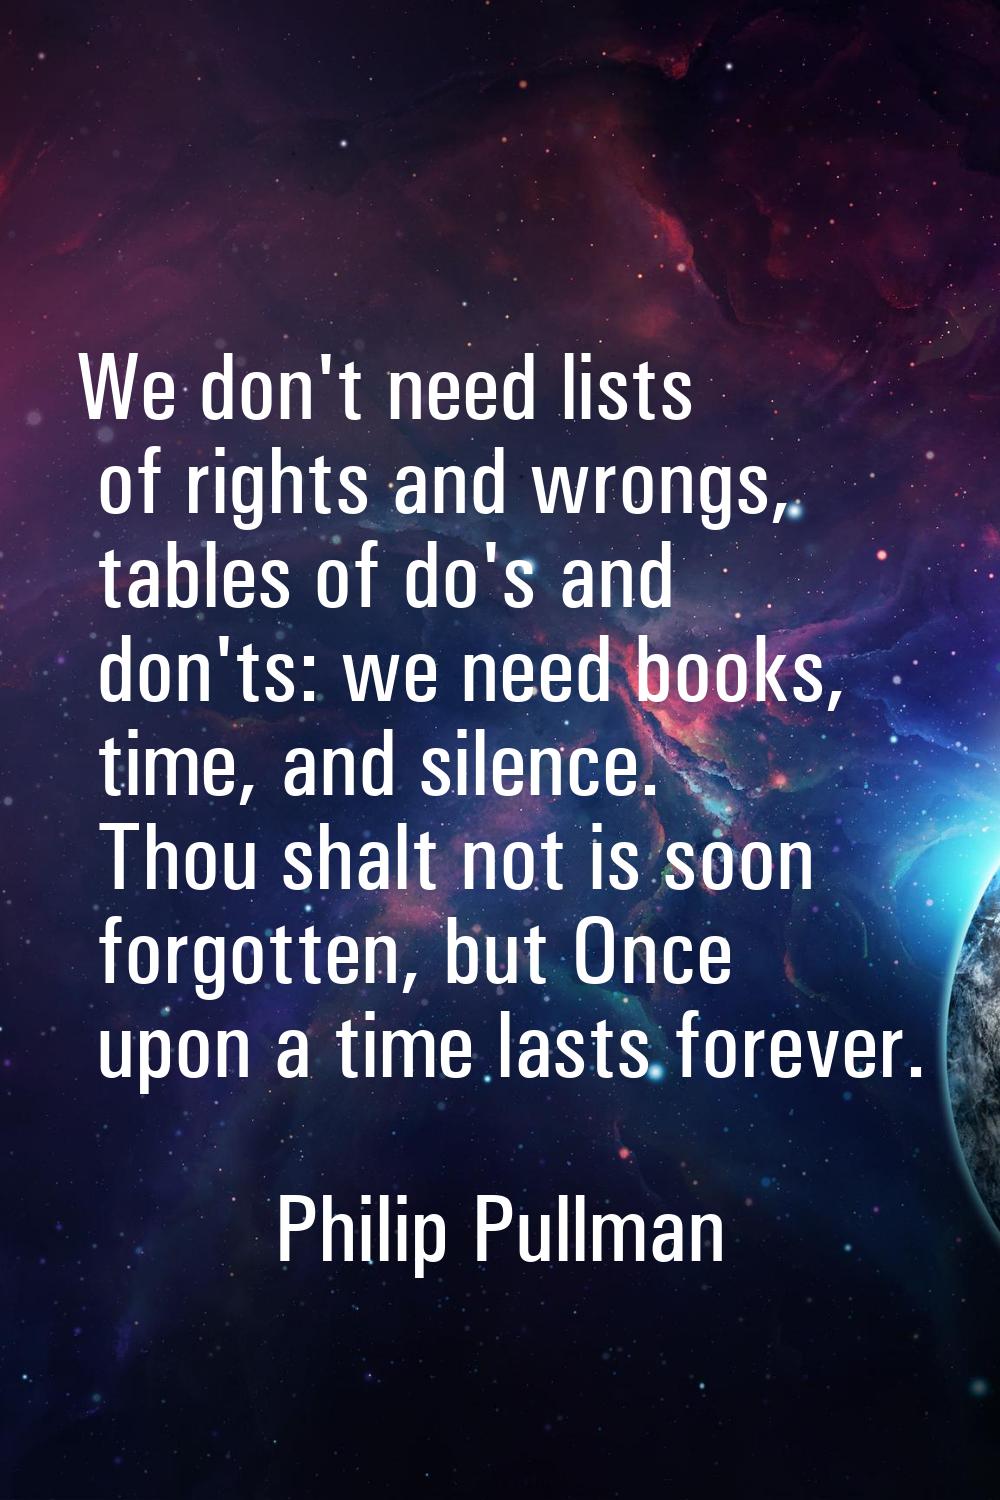 We don't need lists of rights and wrongs, tables of do's and don'ts: we need books, time, and silen